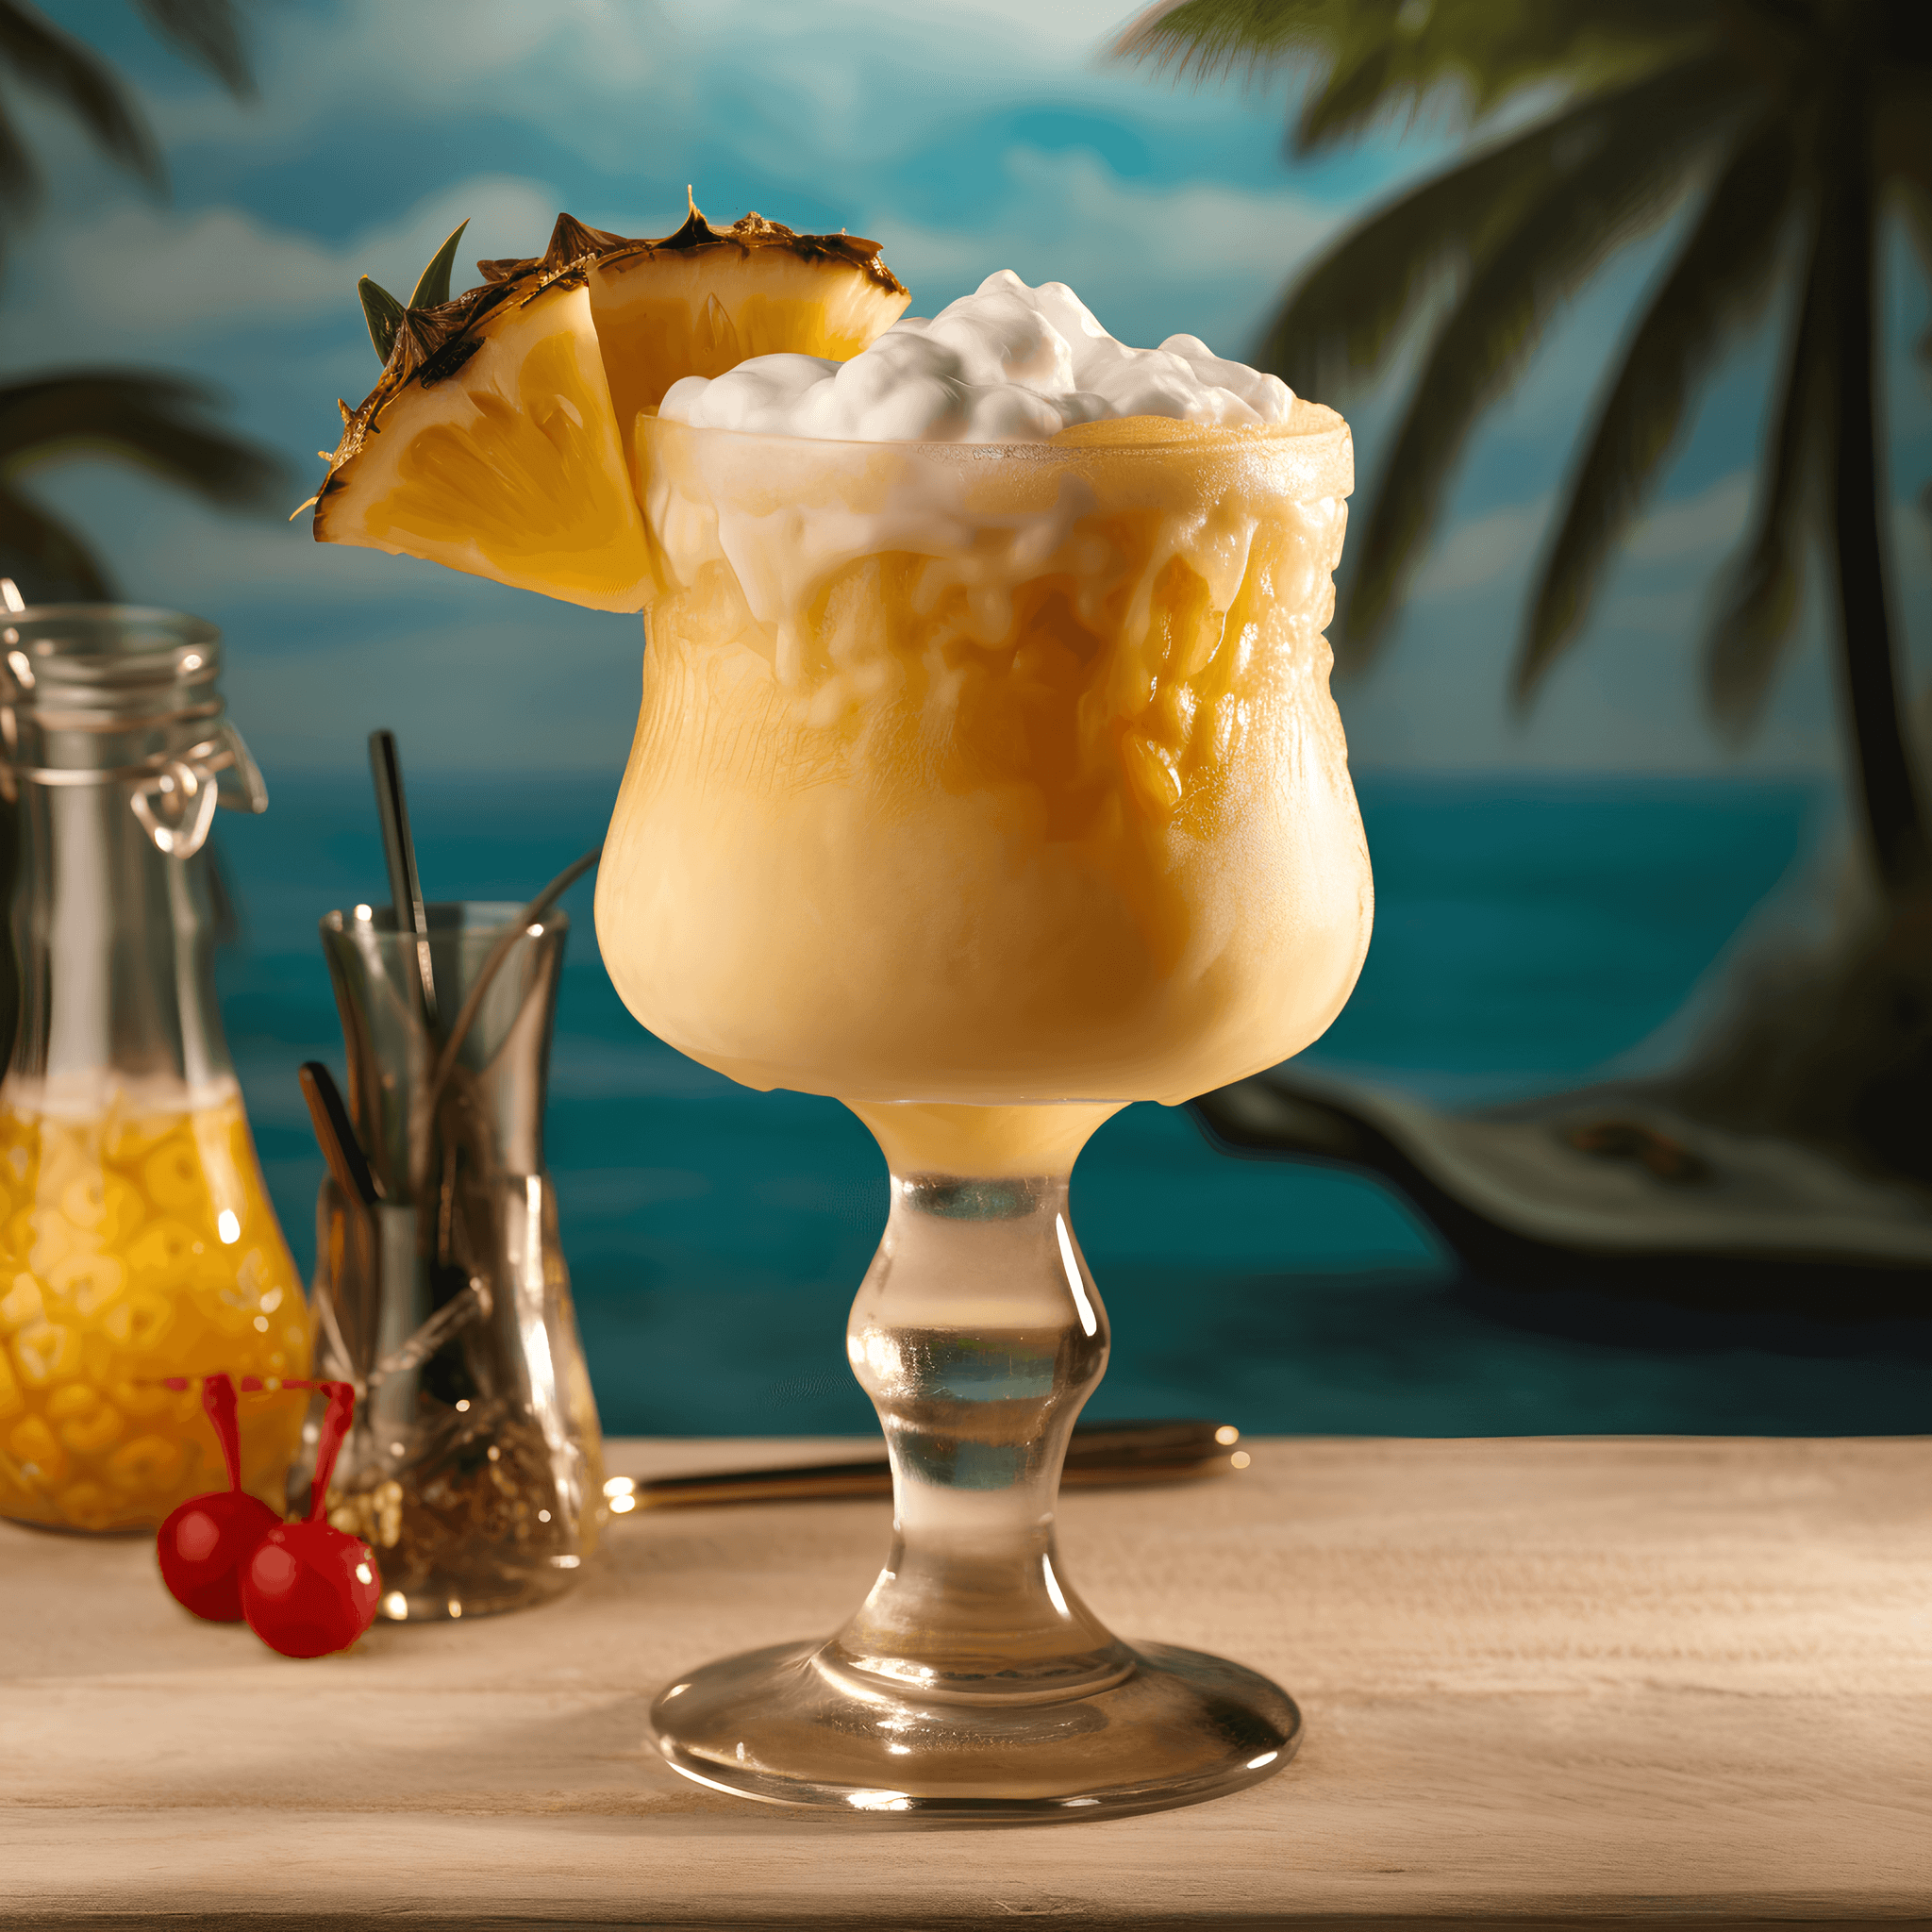 Pina Colada Cocktail Recipe - The Piña Colada is a sweet, creamy, and fruity cocktail with a smooth texture. The flavors of pineapple and coconut blend harmoniously, creating a tropical taste sensation. The rum adds a subtle warmth and depth to the drink.